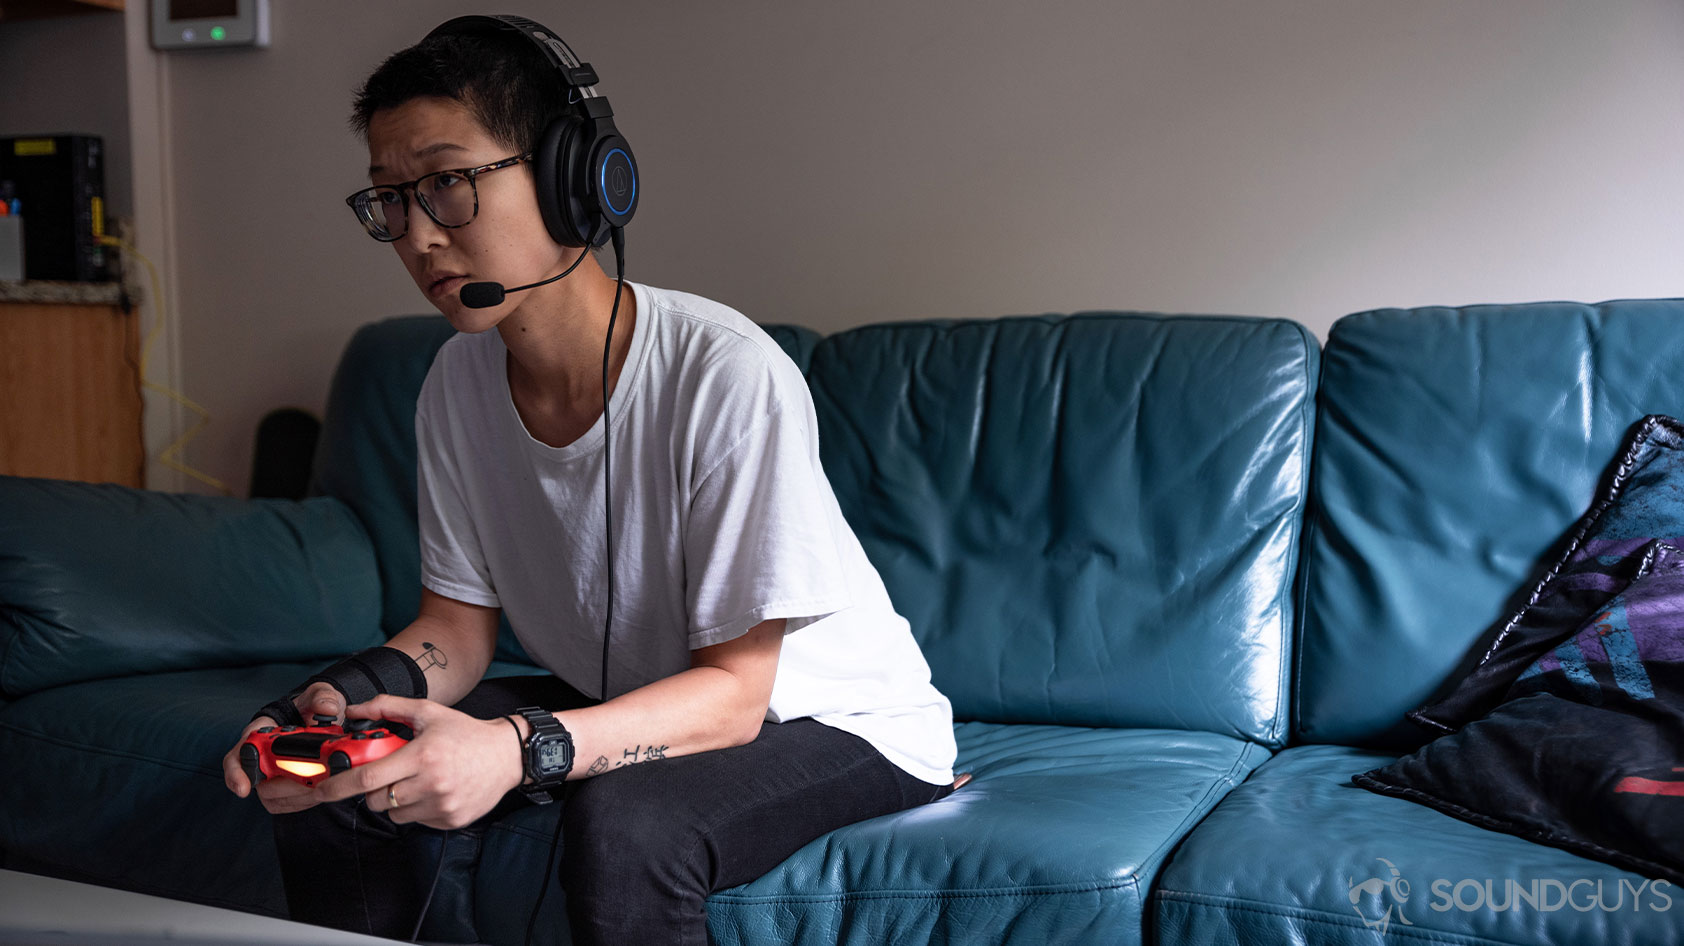 A woman playing on a PlayStation 4 with the Audio-Technica ATH-G1 headset plugged directly into the controller.